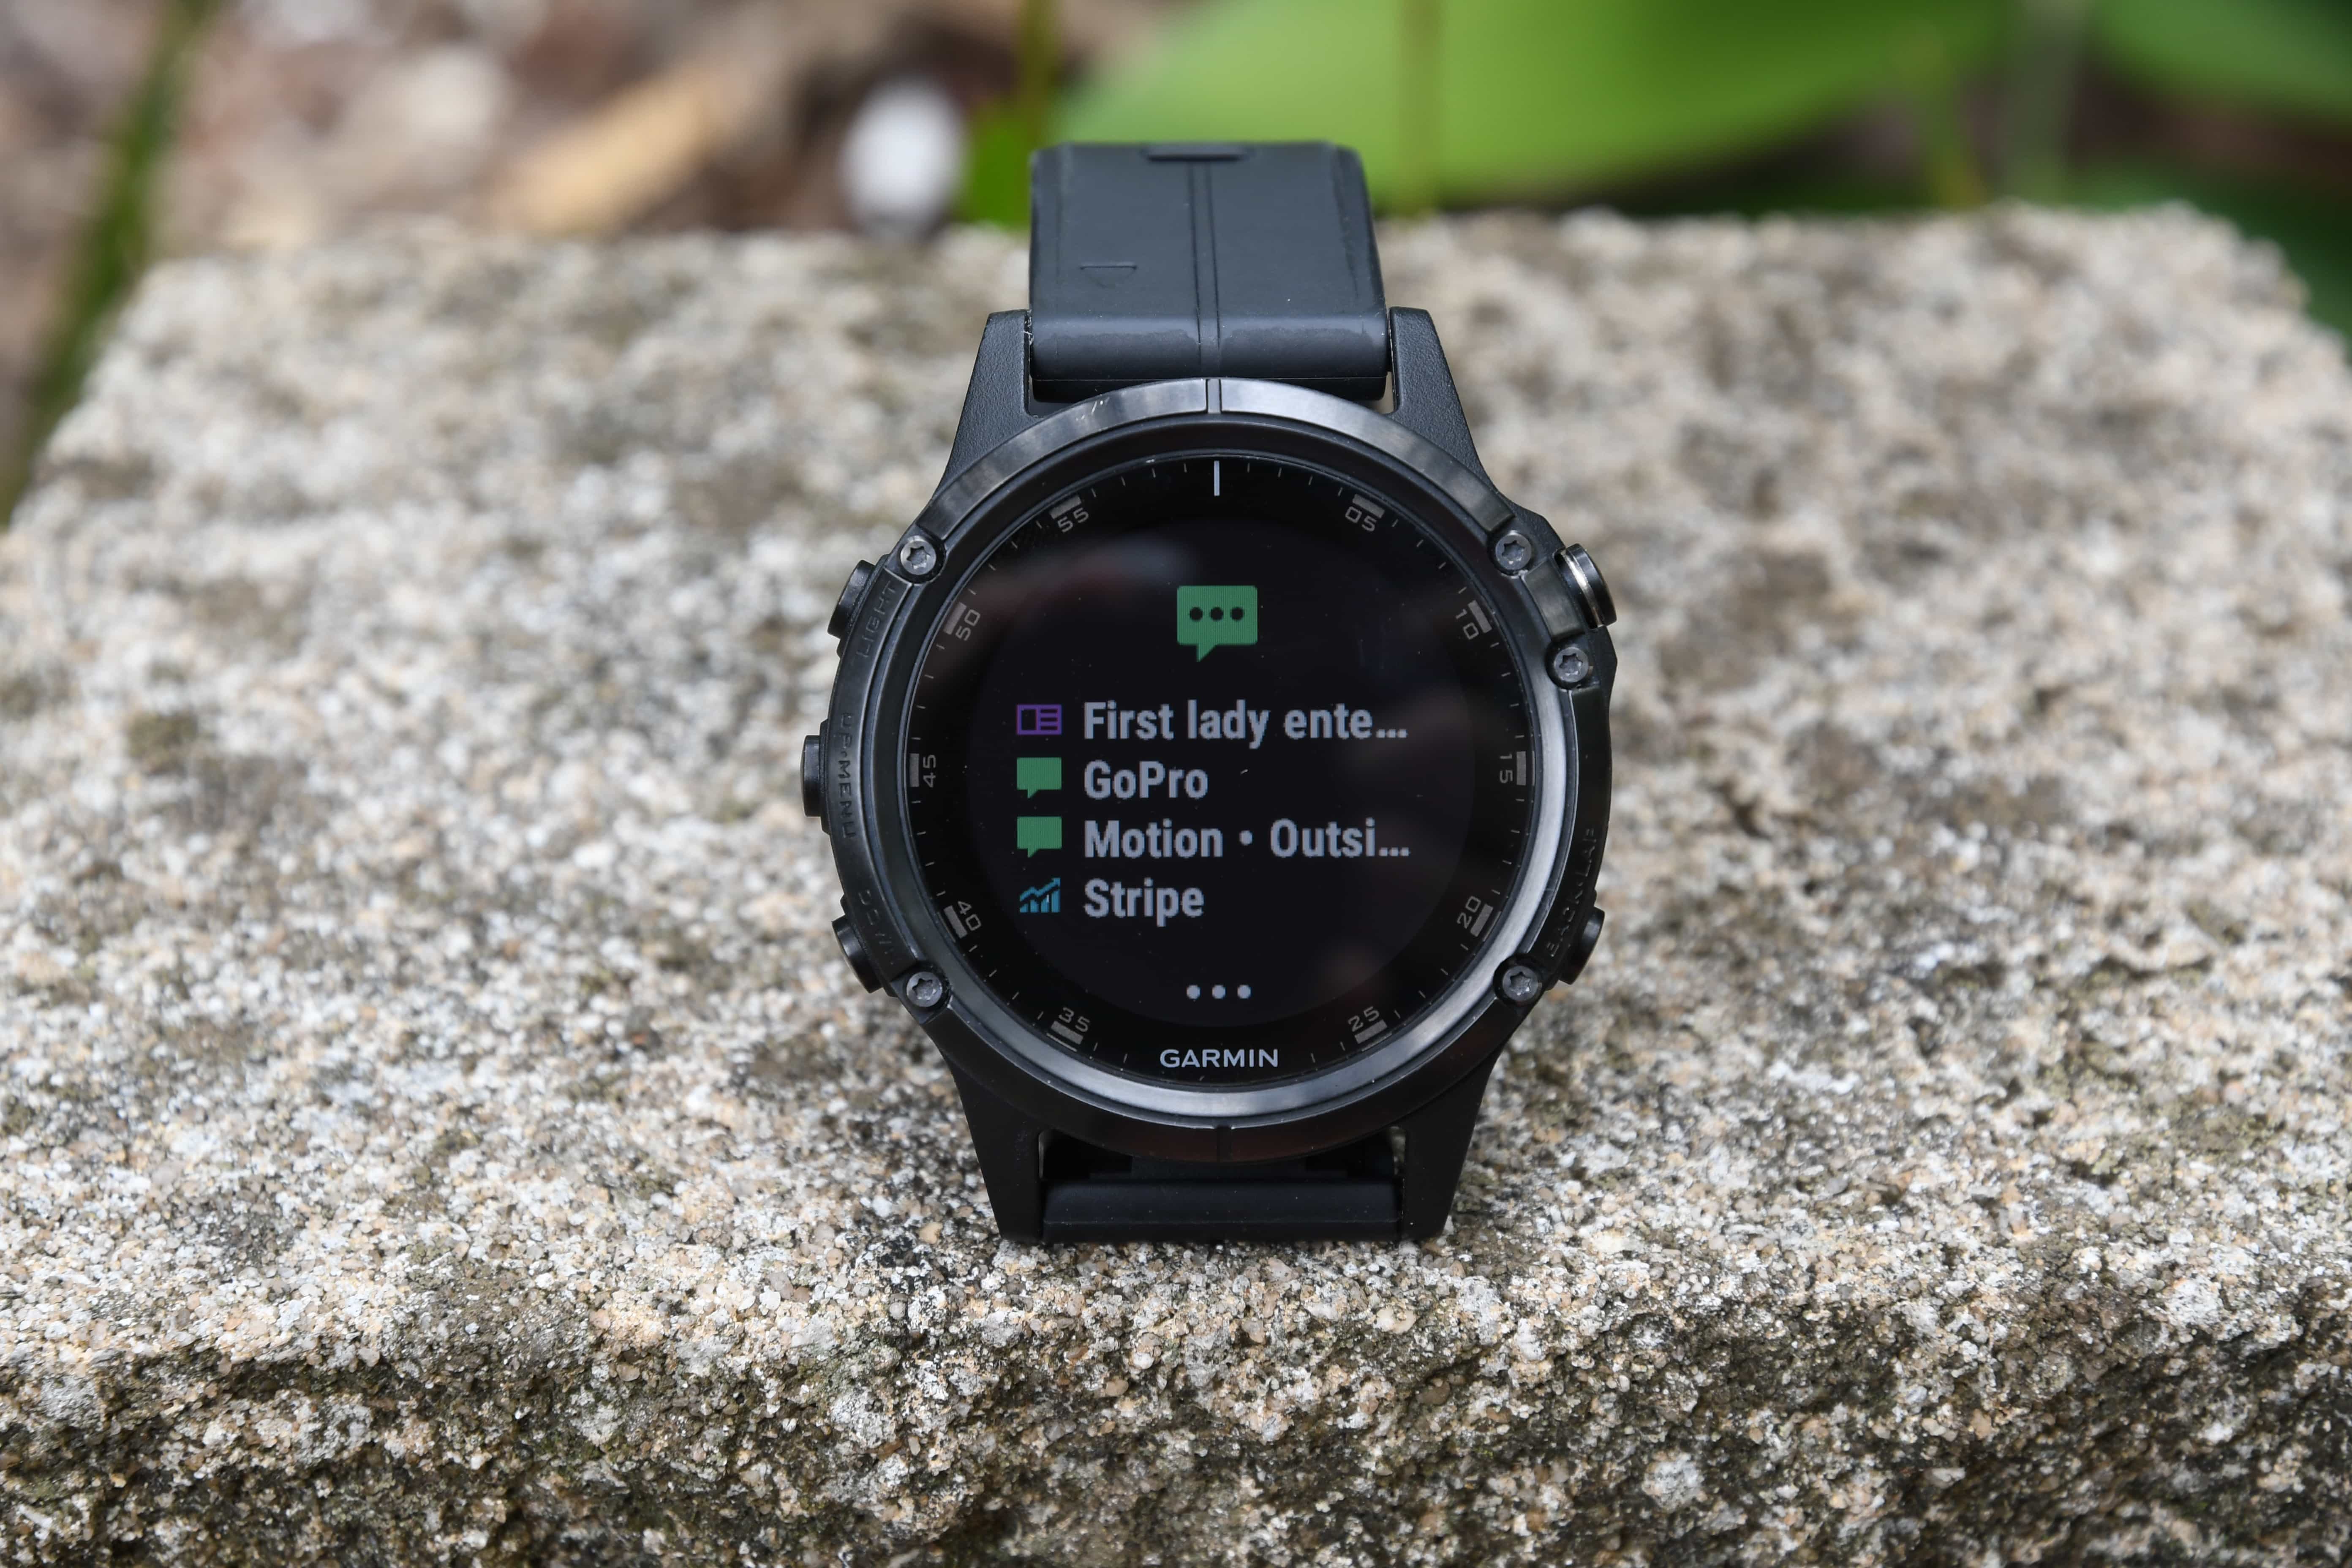 Garmin Fenix 5/5S/5X Plus In-Depth Review (with Maps, Music, Payments) DC Rainmaker